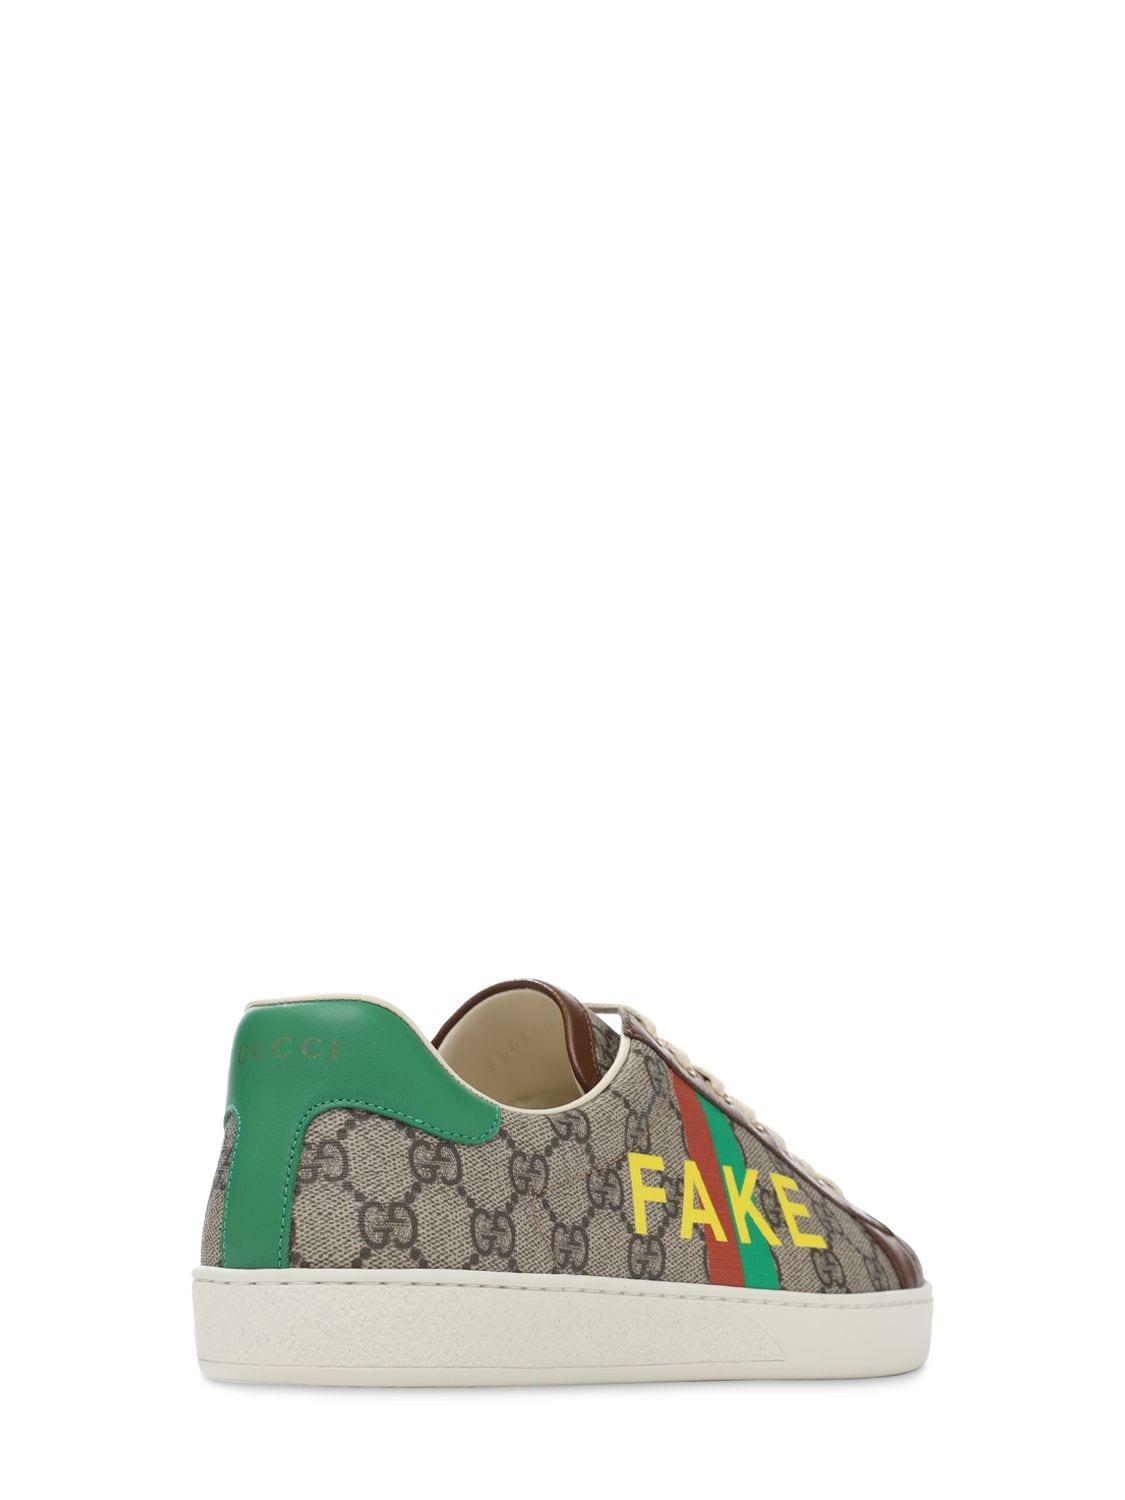 Gucci Canvas 'fake/not' Print Ace Sneaker in Beige (Natural) - Save 36% -  Lyst